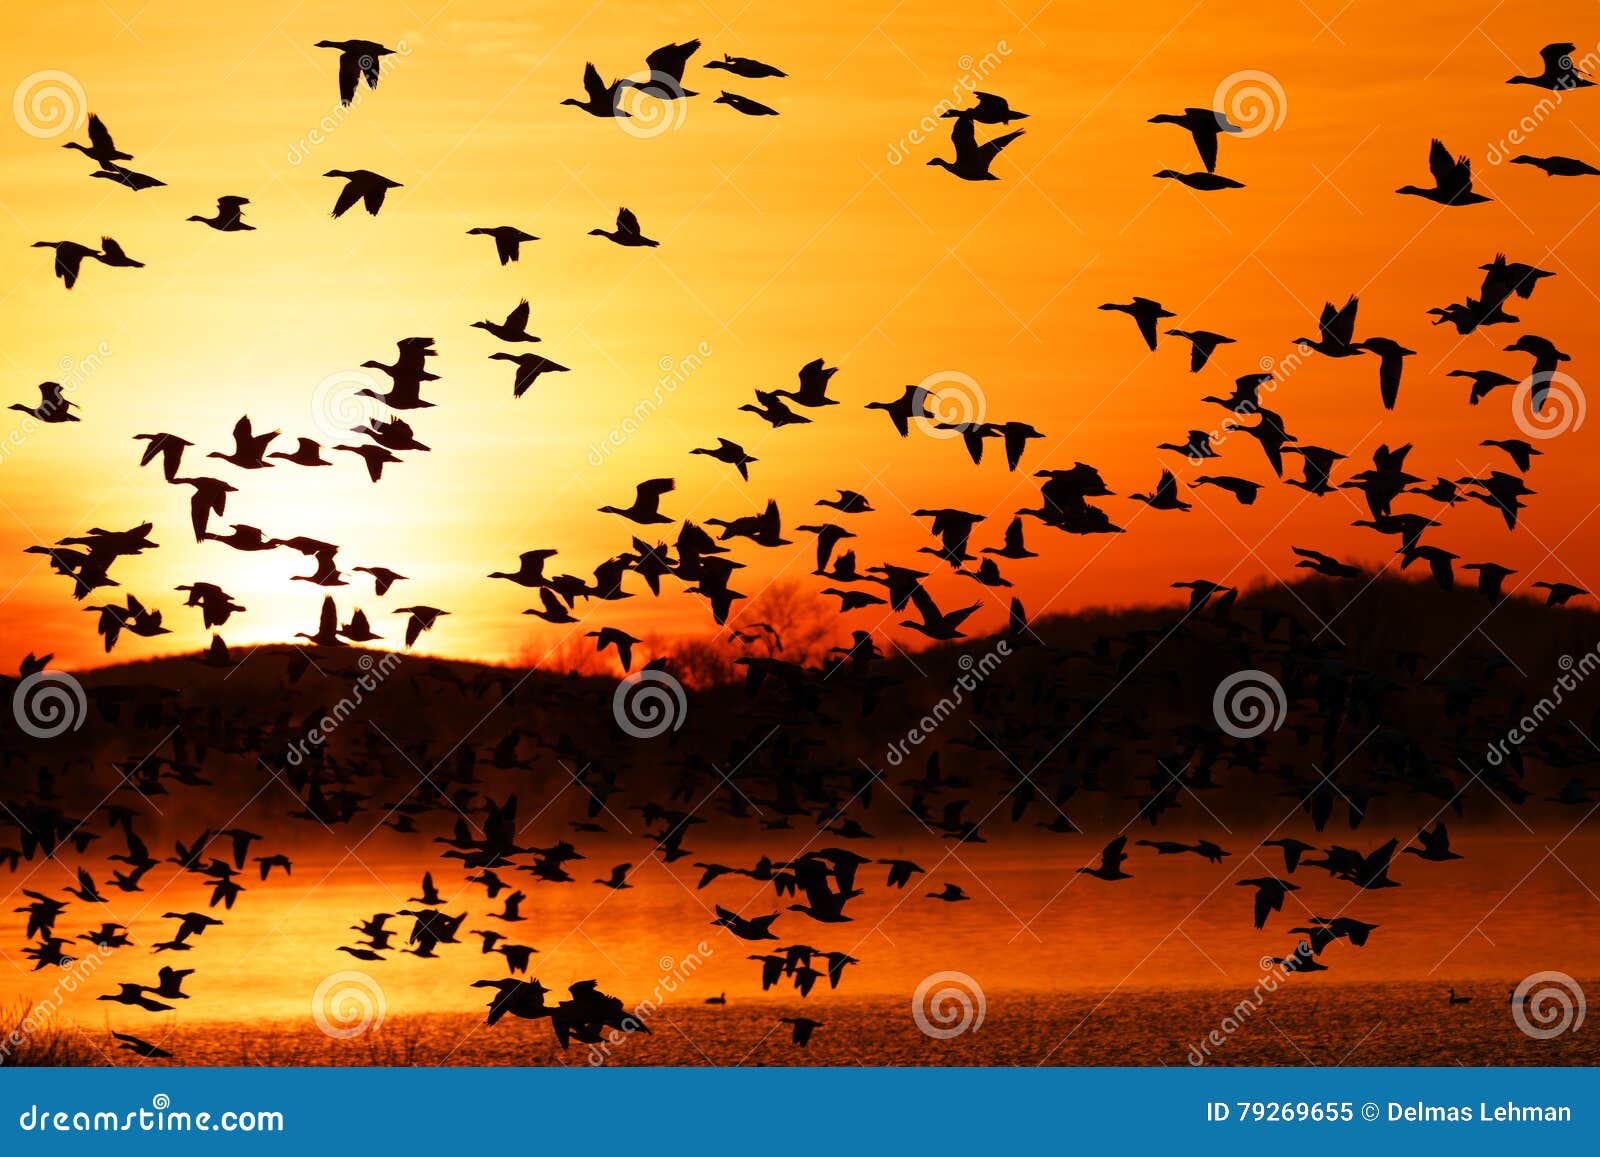 migrating snow geese fly at sunrise